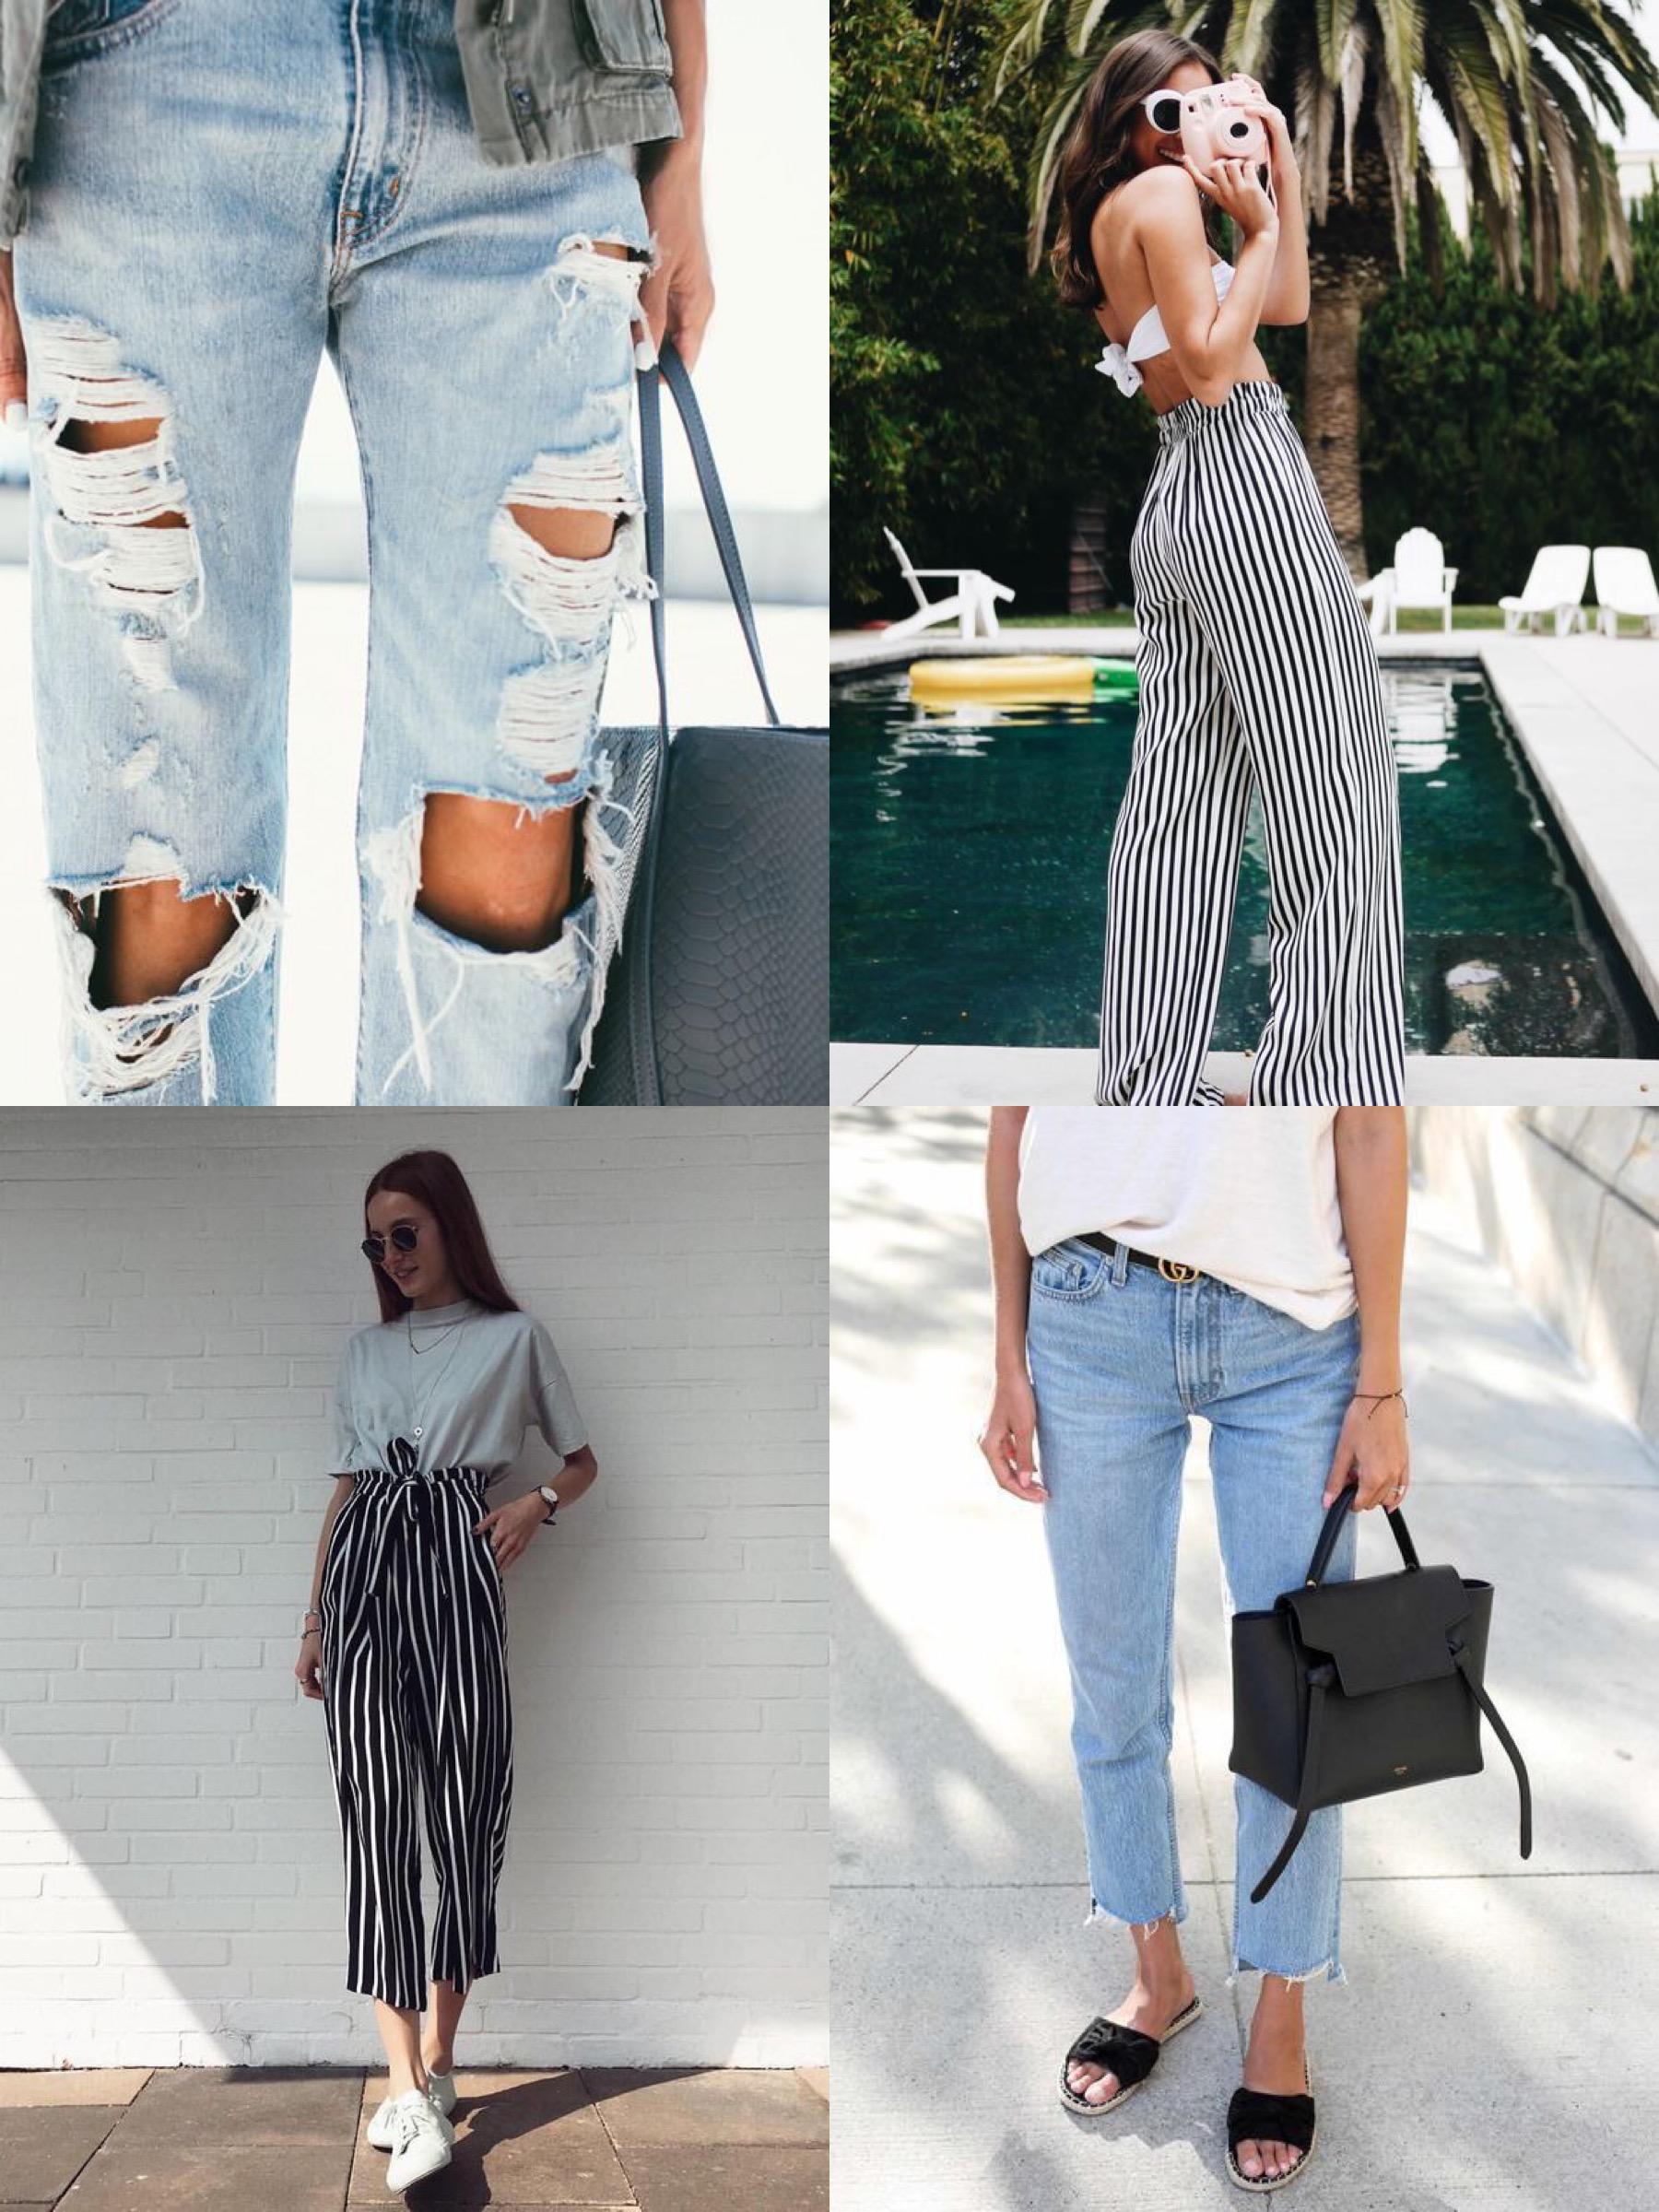 20 Must-Have Fashion Items For Endless Outfit Combos - Abby Saylor